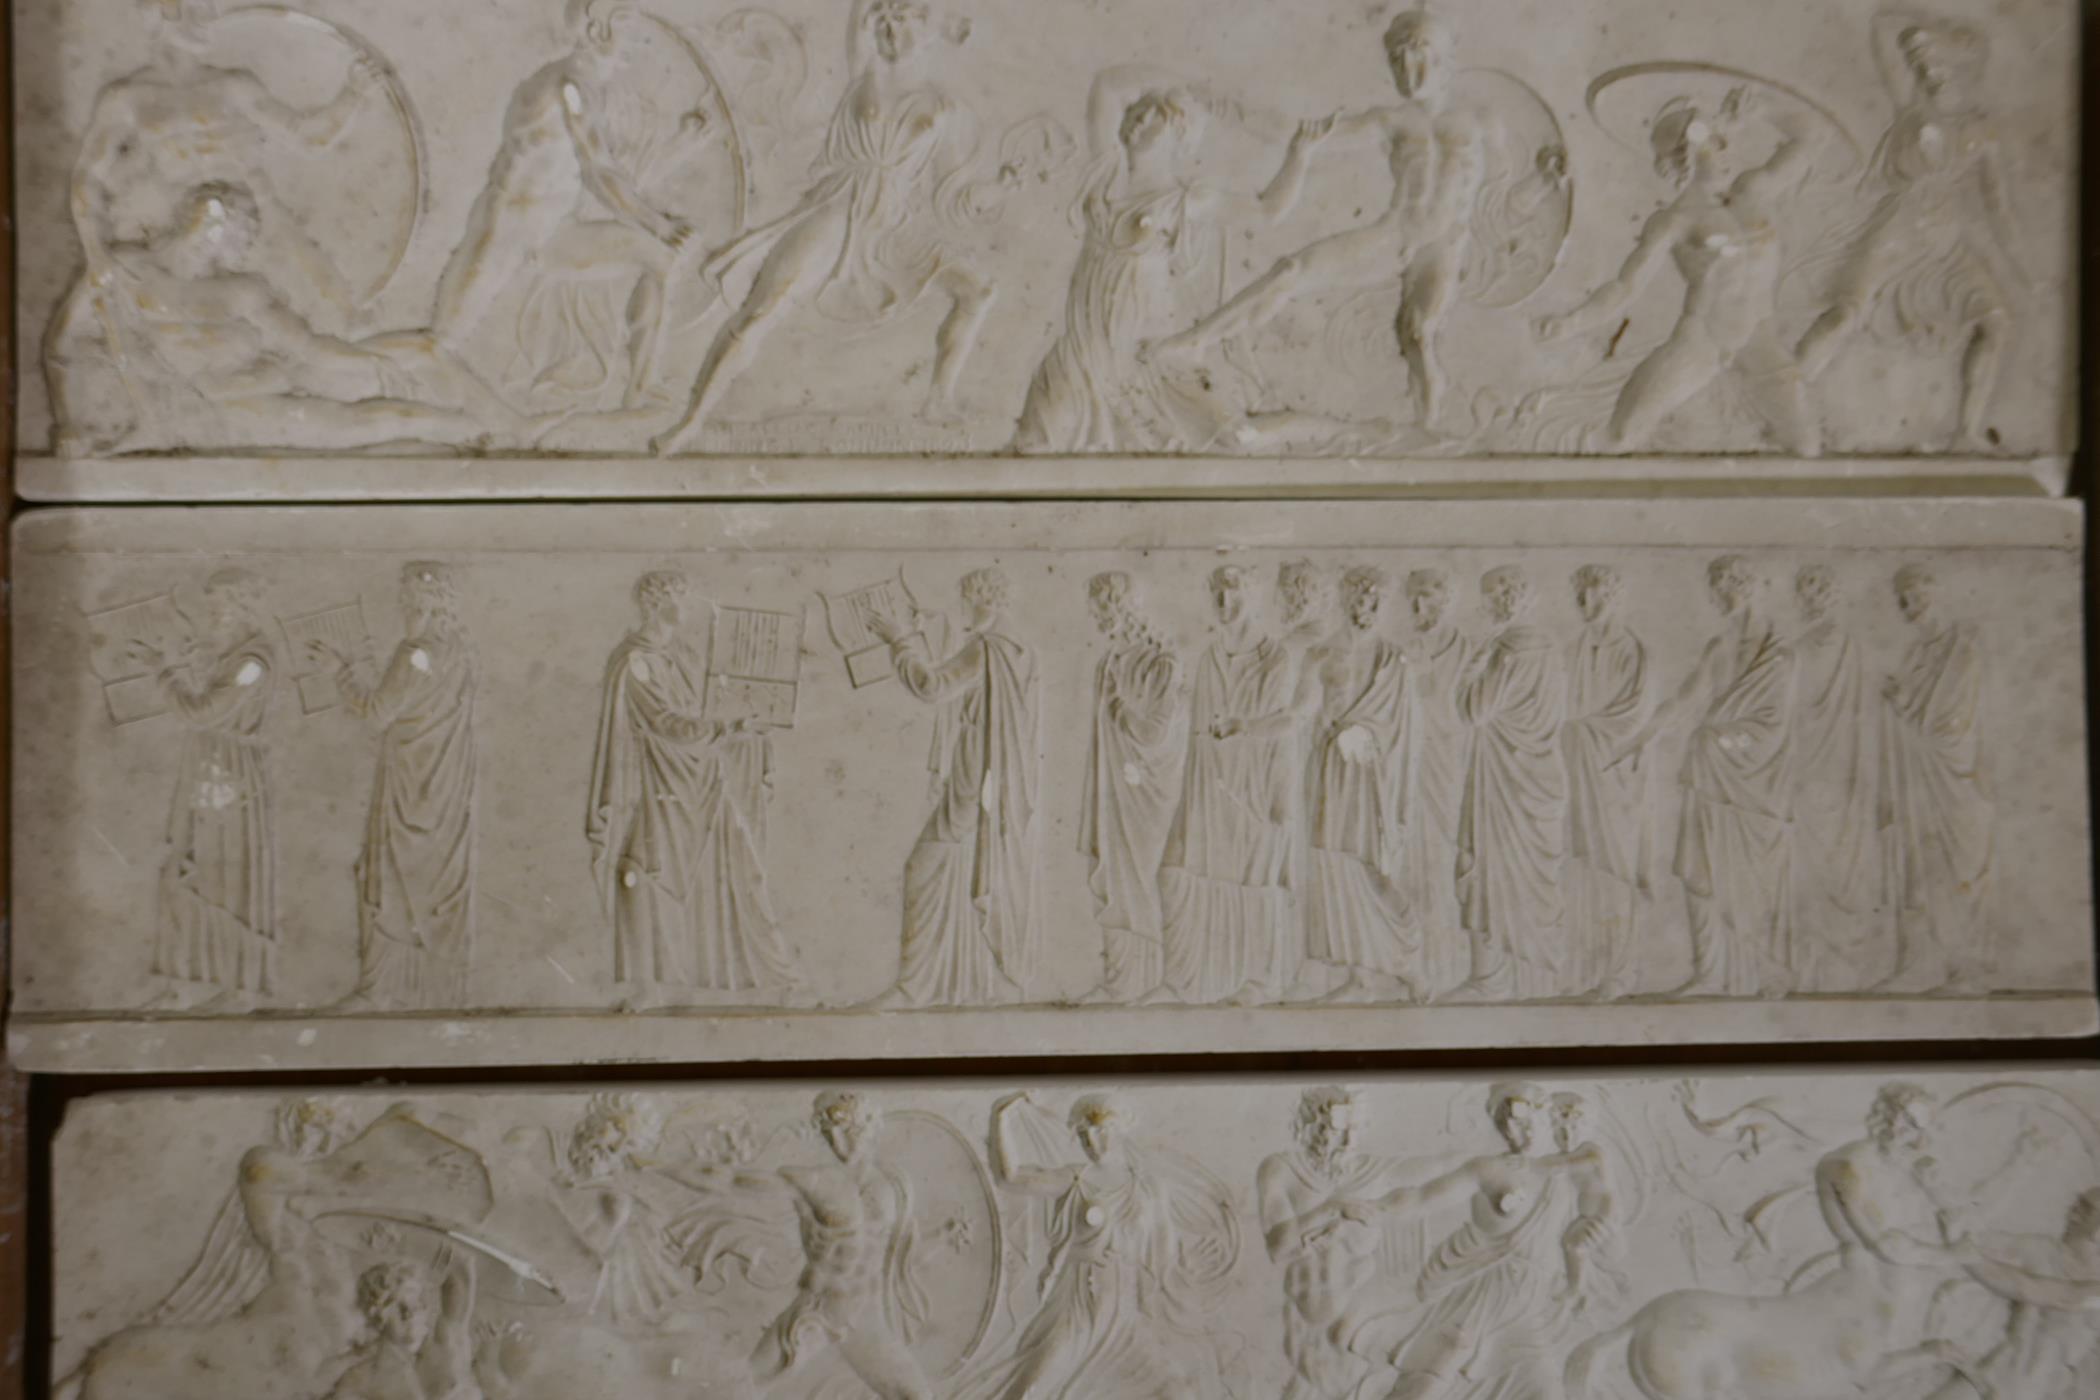 After John Henning, Grand Tour plaster casts of the friezes from the Pantheon and Phygalian - Image 9 of 9